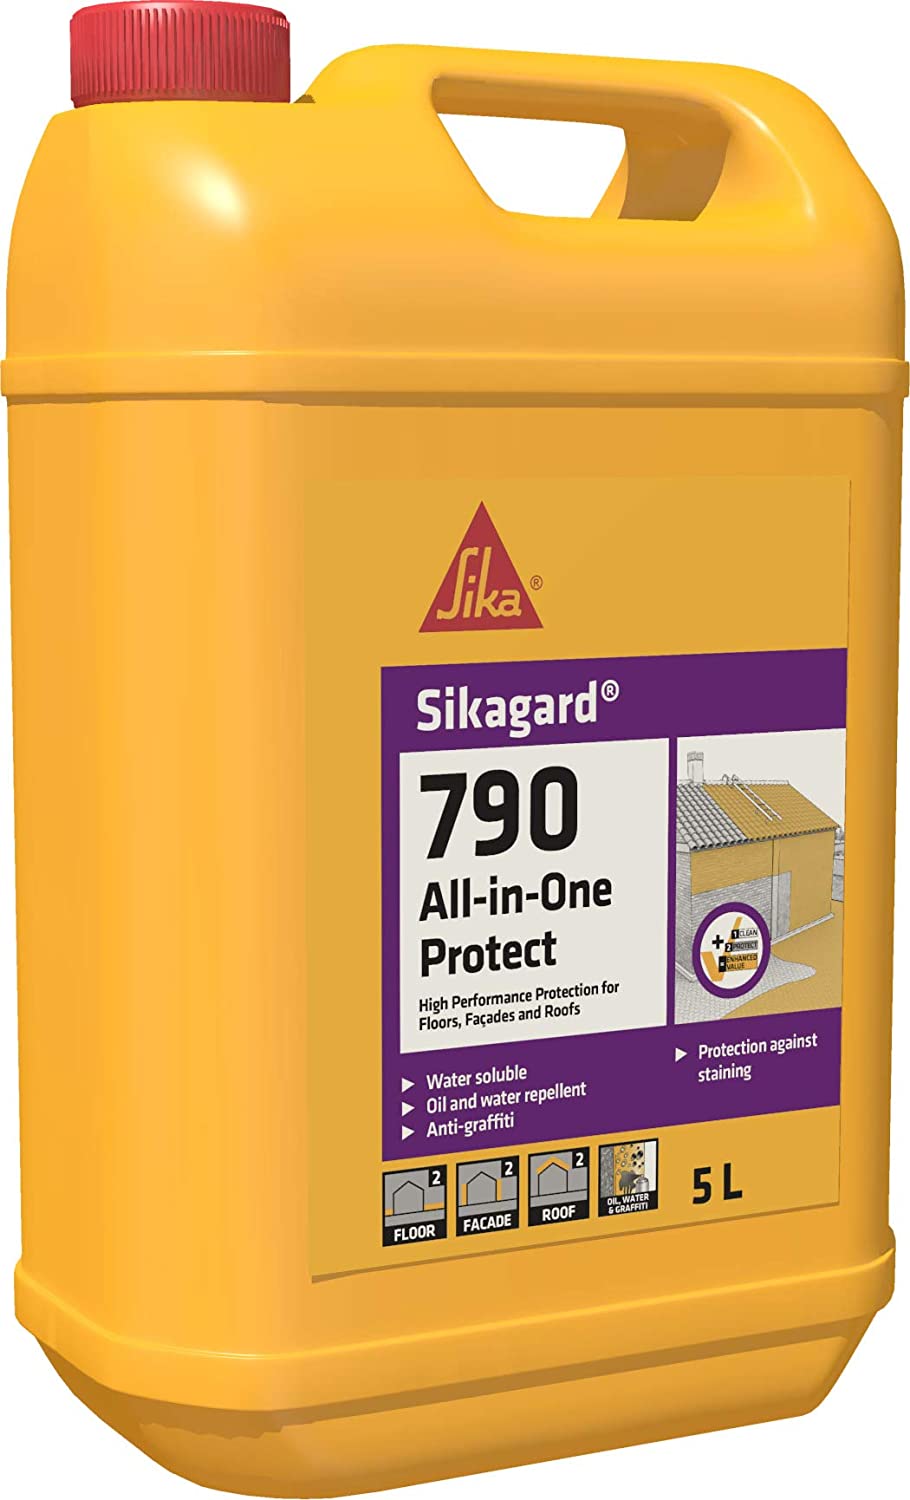 Sika Sikagard-790 All-in-One Protect 5l